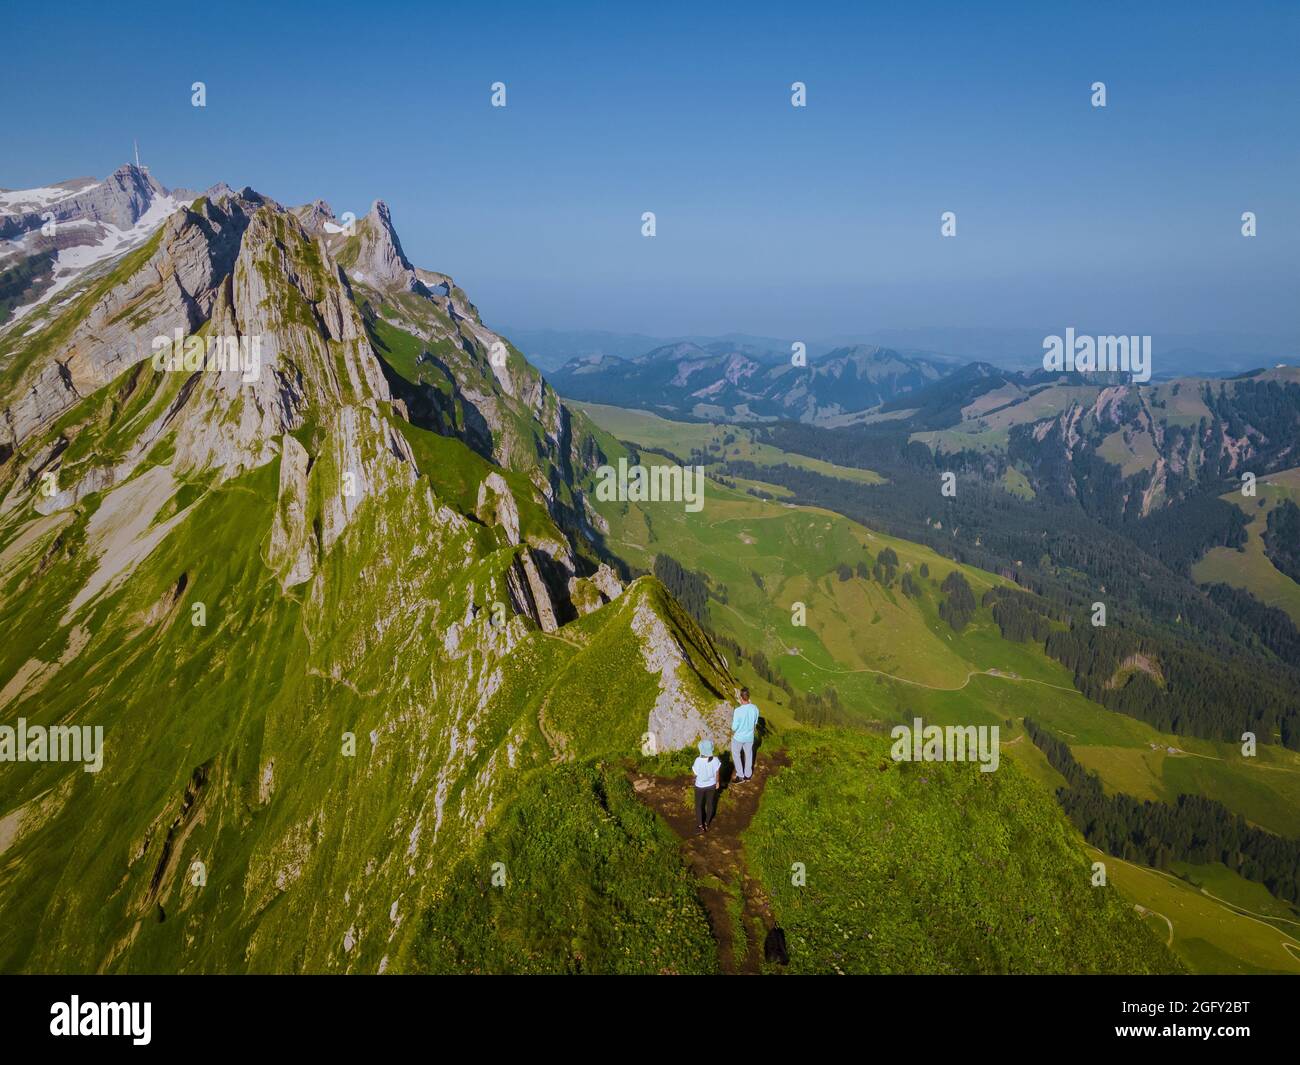 A woman with a backpack stands on top of a mountain, The girl travels to beautiful places, Reaching the goal, mountain ridge at Saxer Lucke, Kreuzberg in Alpstein Appenzell Innerrhoden Switzerland.  Stock Photo